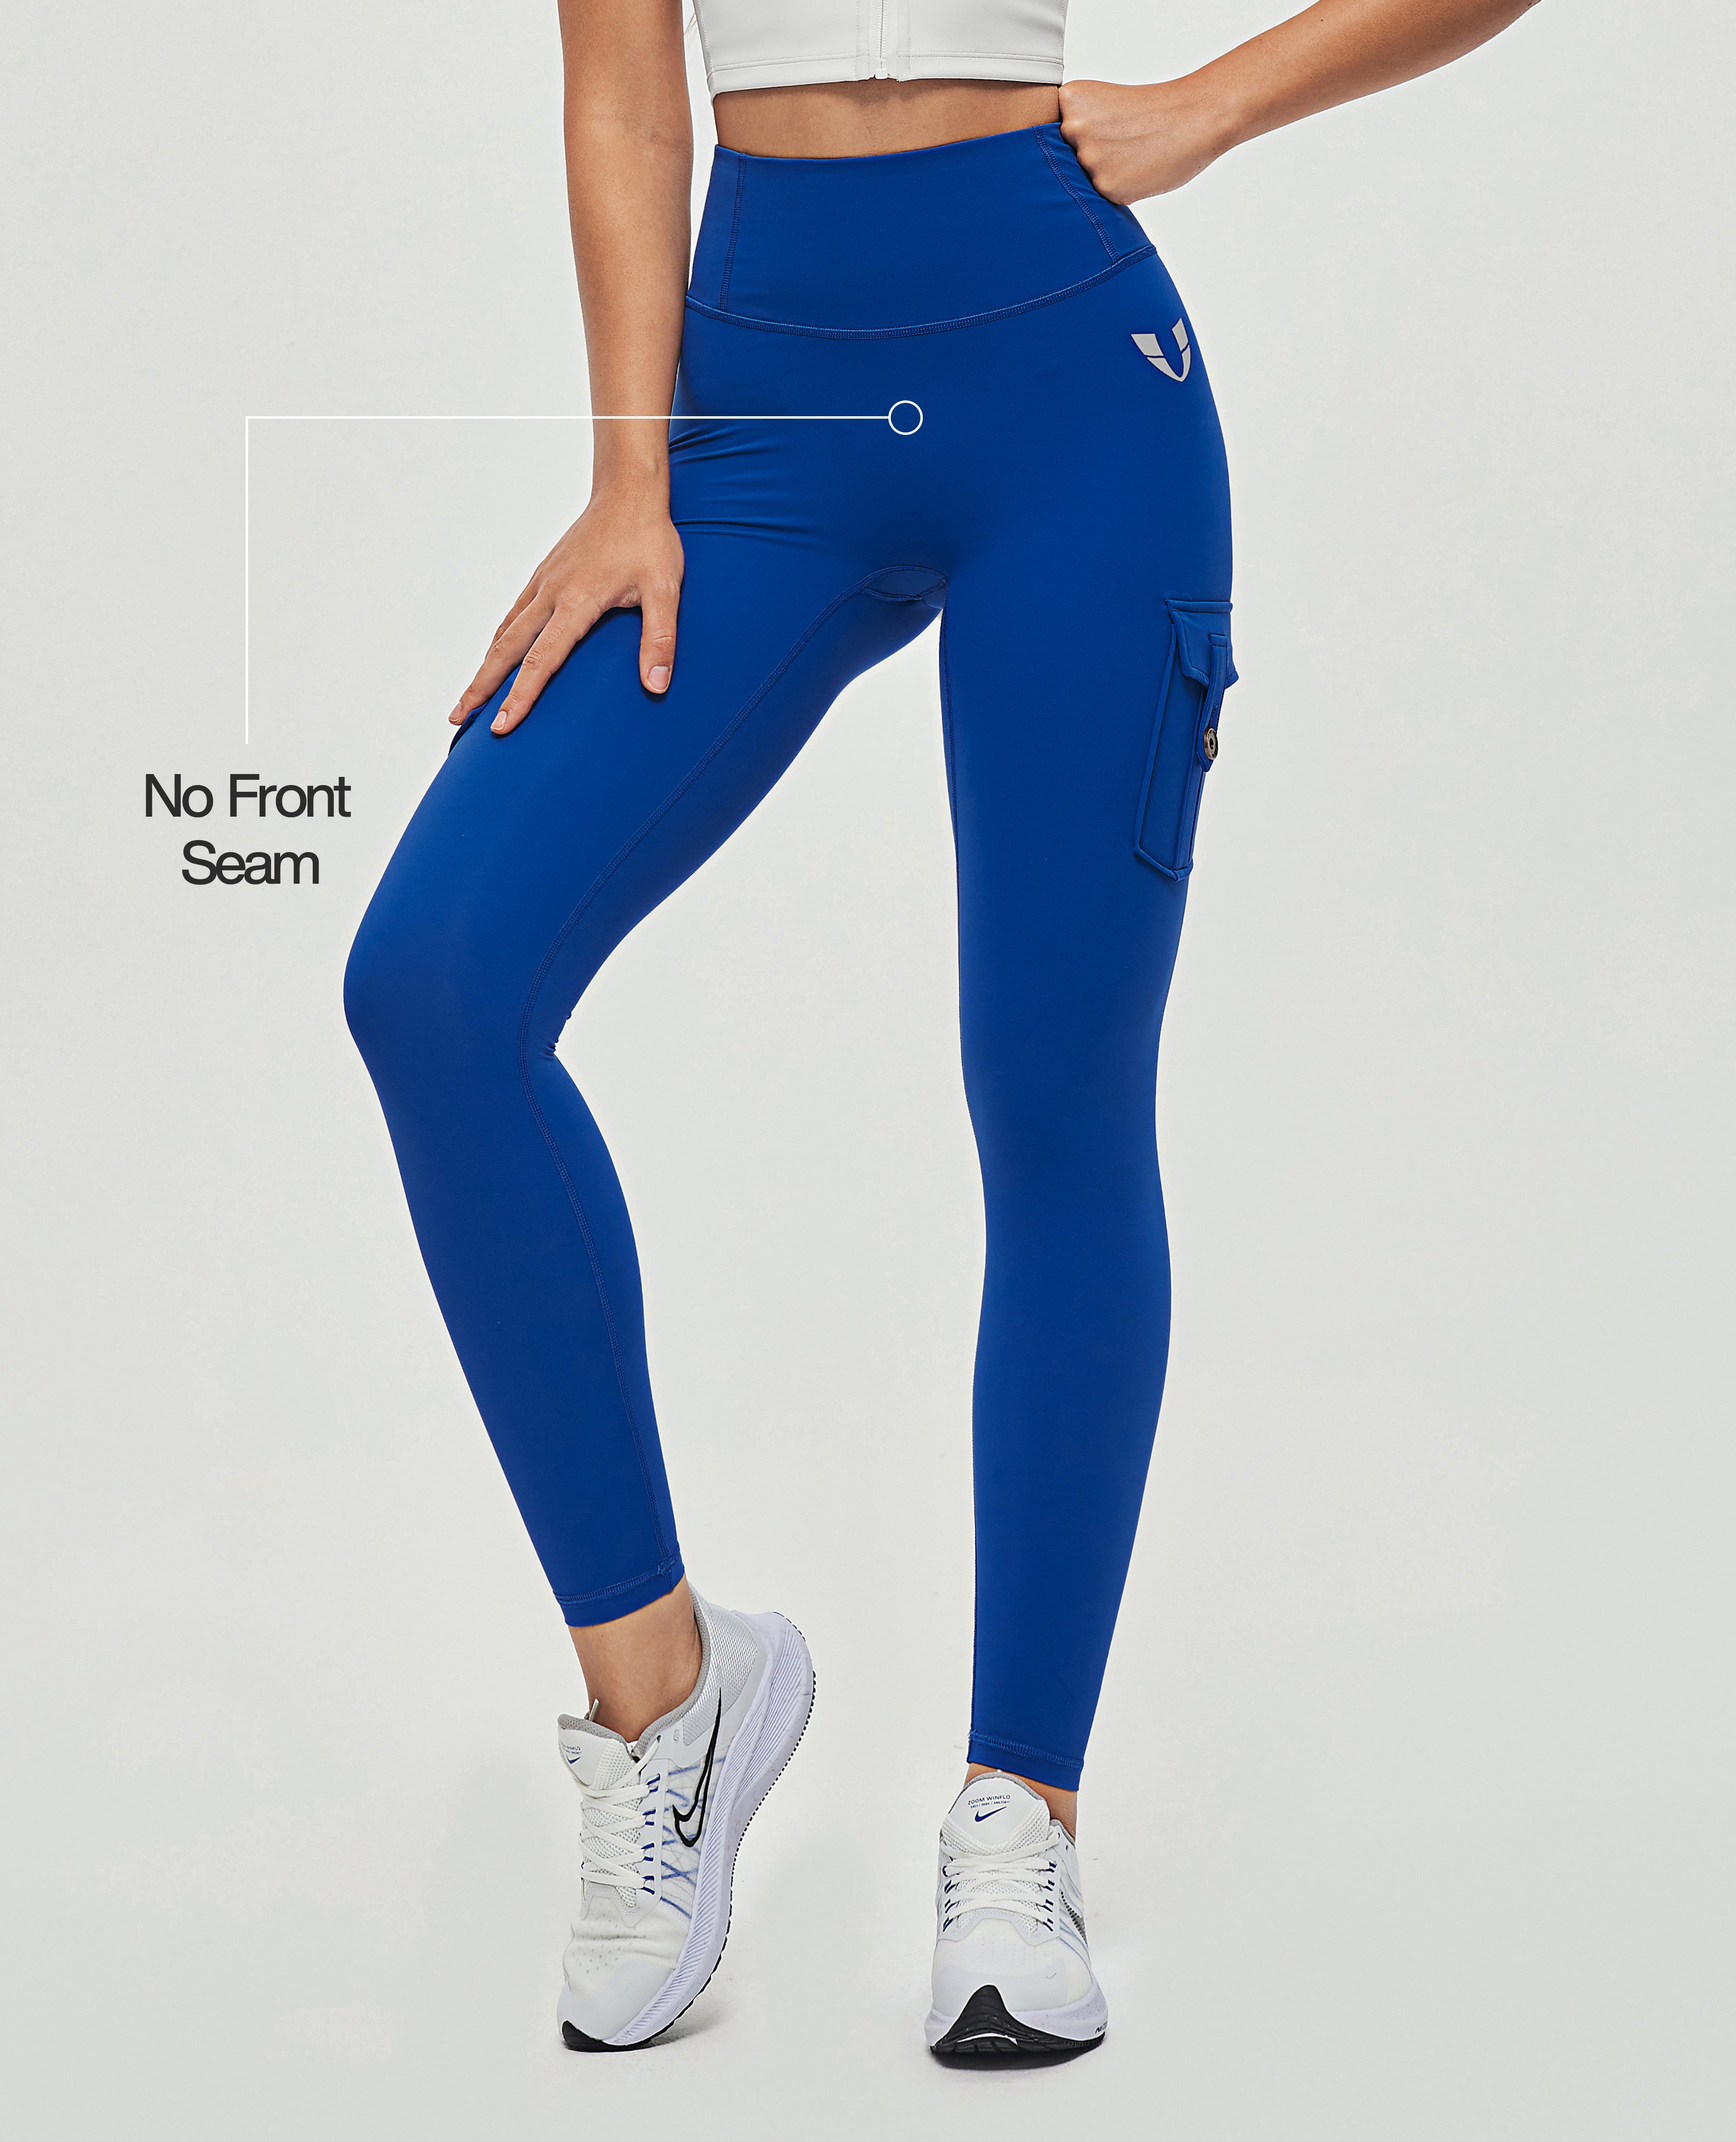 Bottoms: Athletic Leggings & Shorts, FIRM ABS Activewear